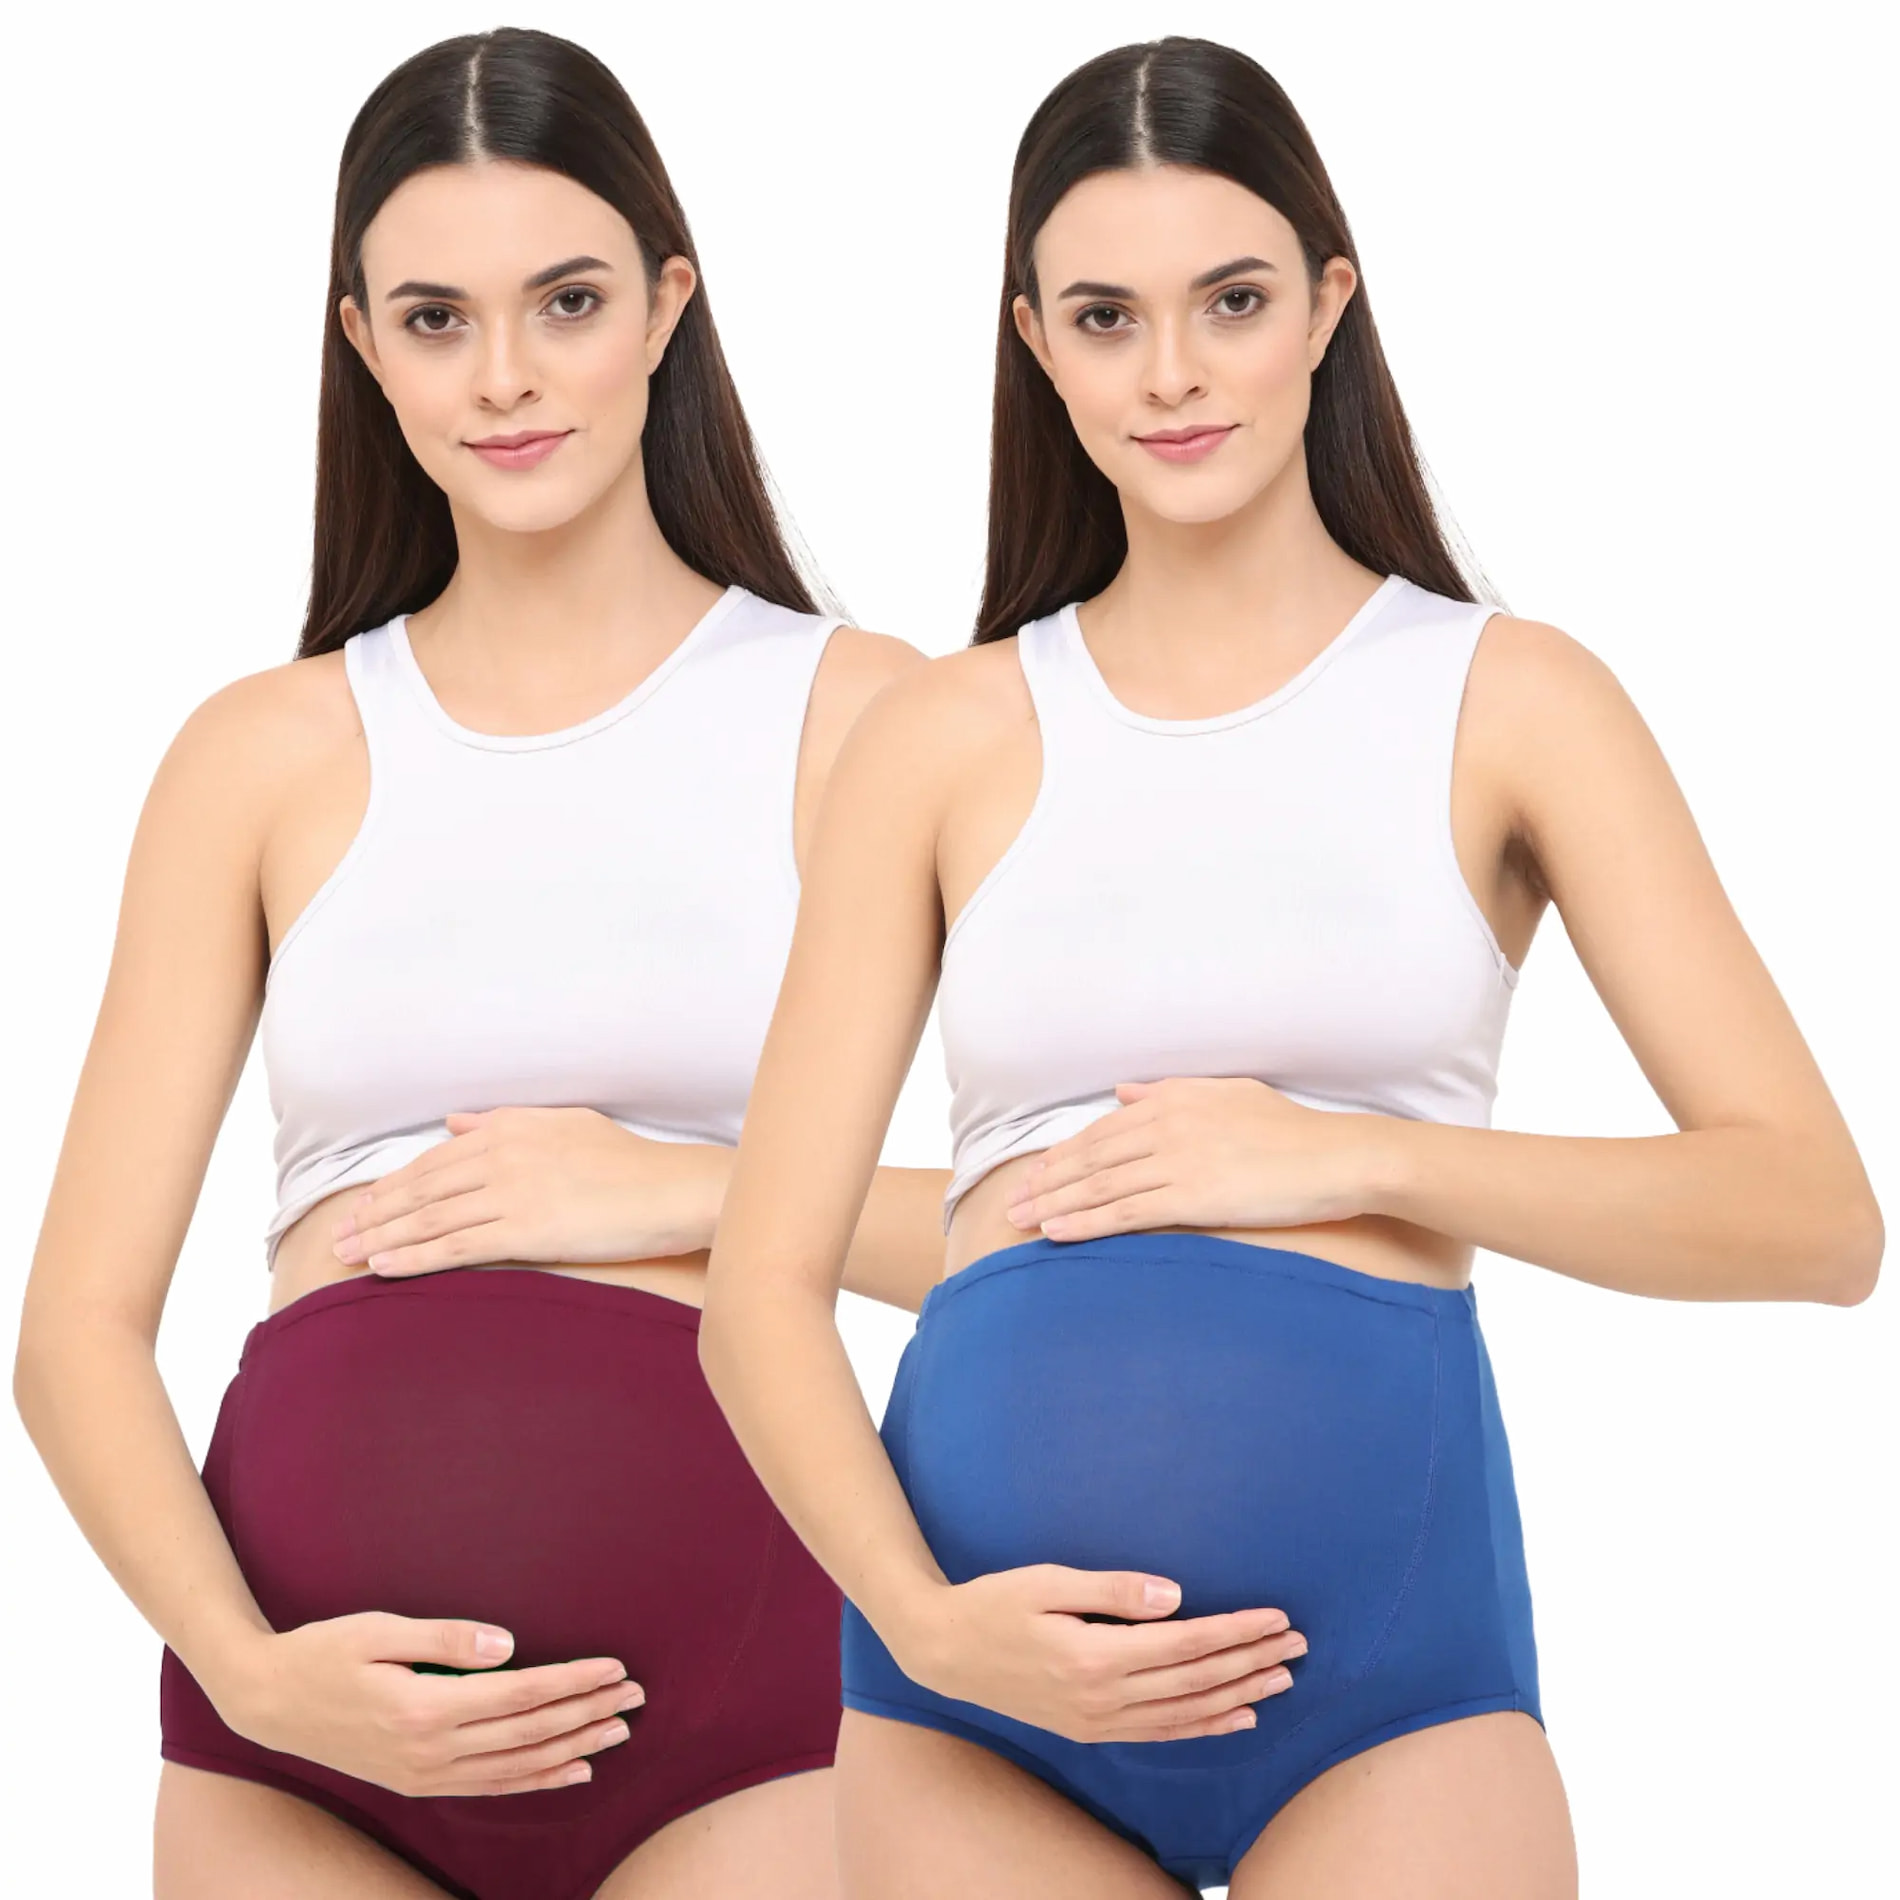 Mylo High Waist Maternity/Postpartum Panty - Anti-Microbial with Comfy Adjustable Waistband - Dazzling Blue & Ruby Wine - M - Pack of 2